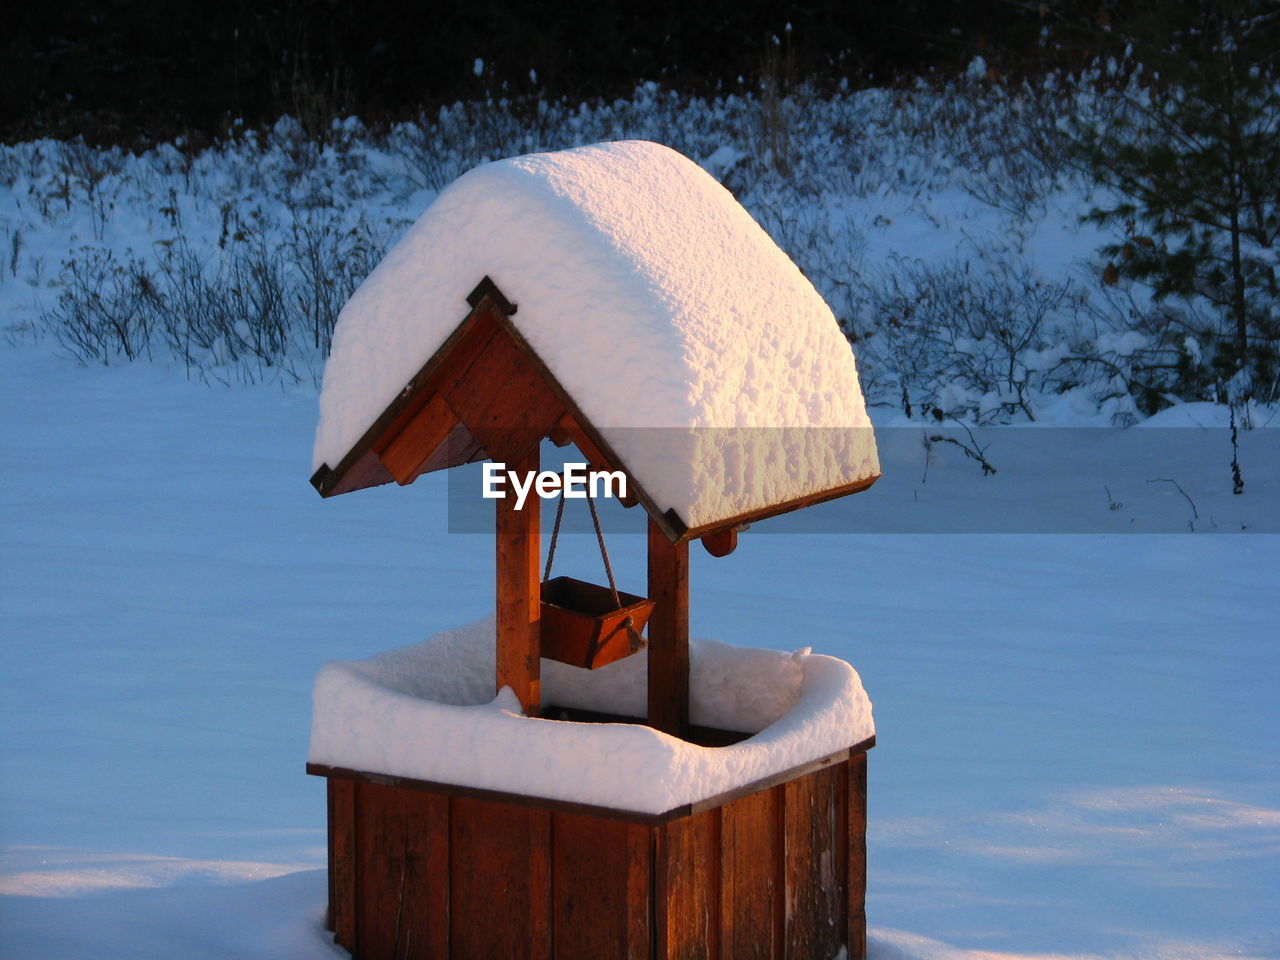 Snow covered wishing well